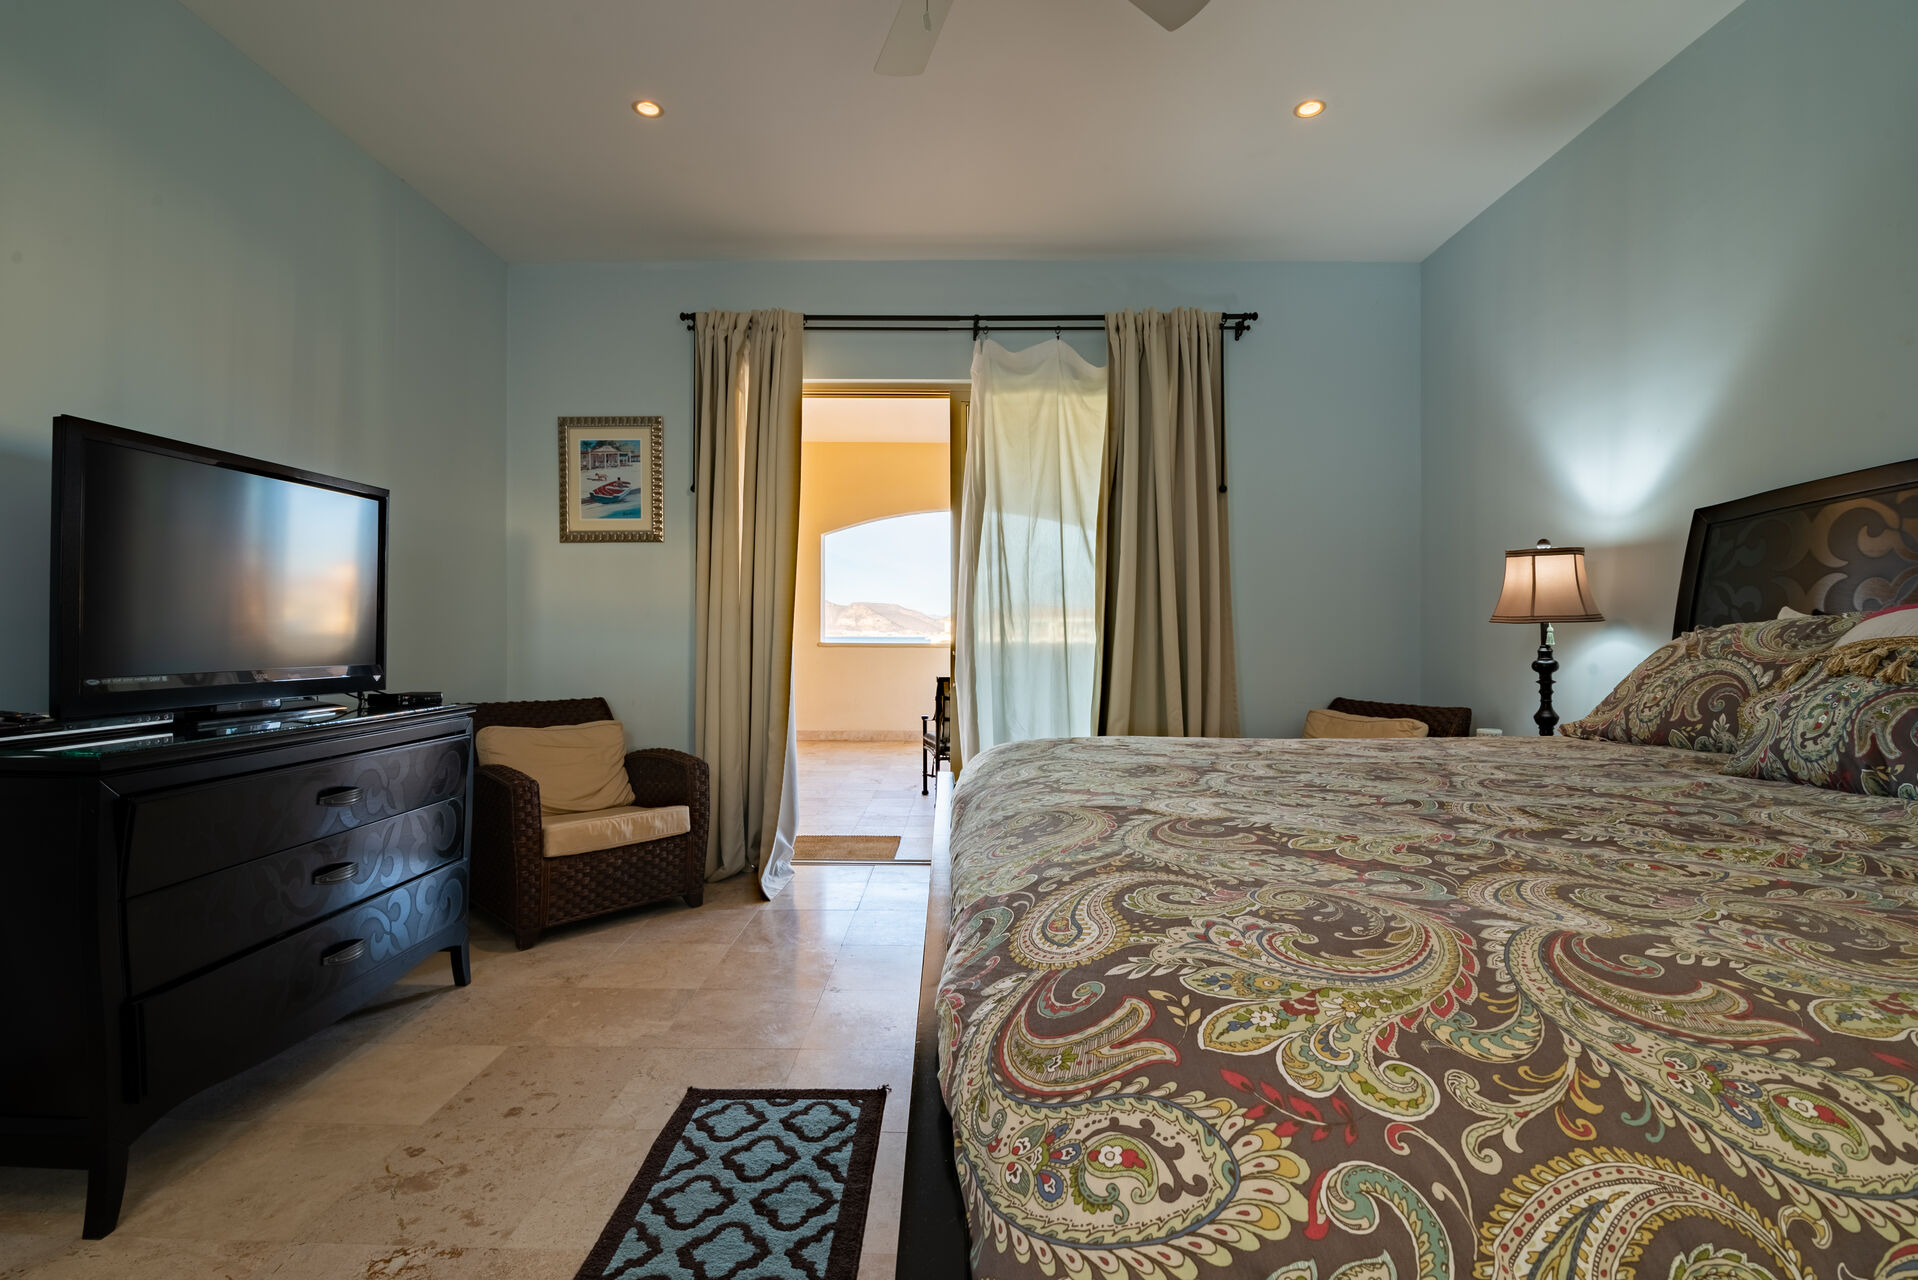 Main bedroom with seaview.